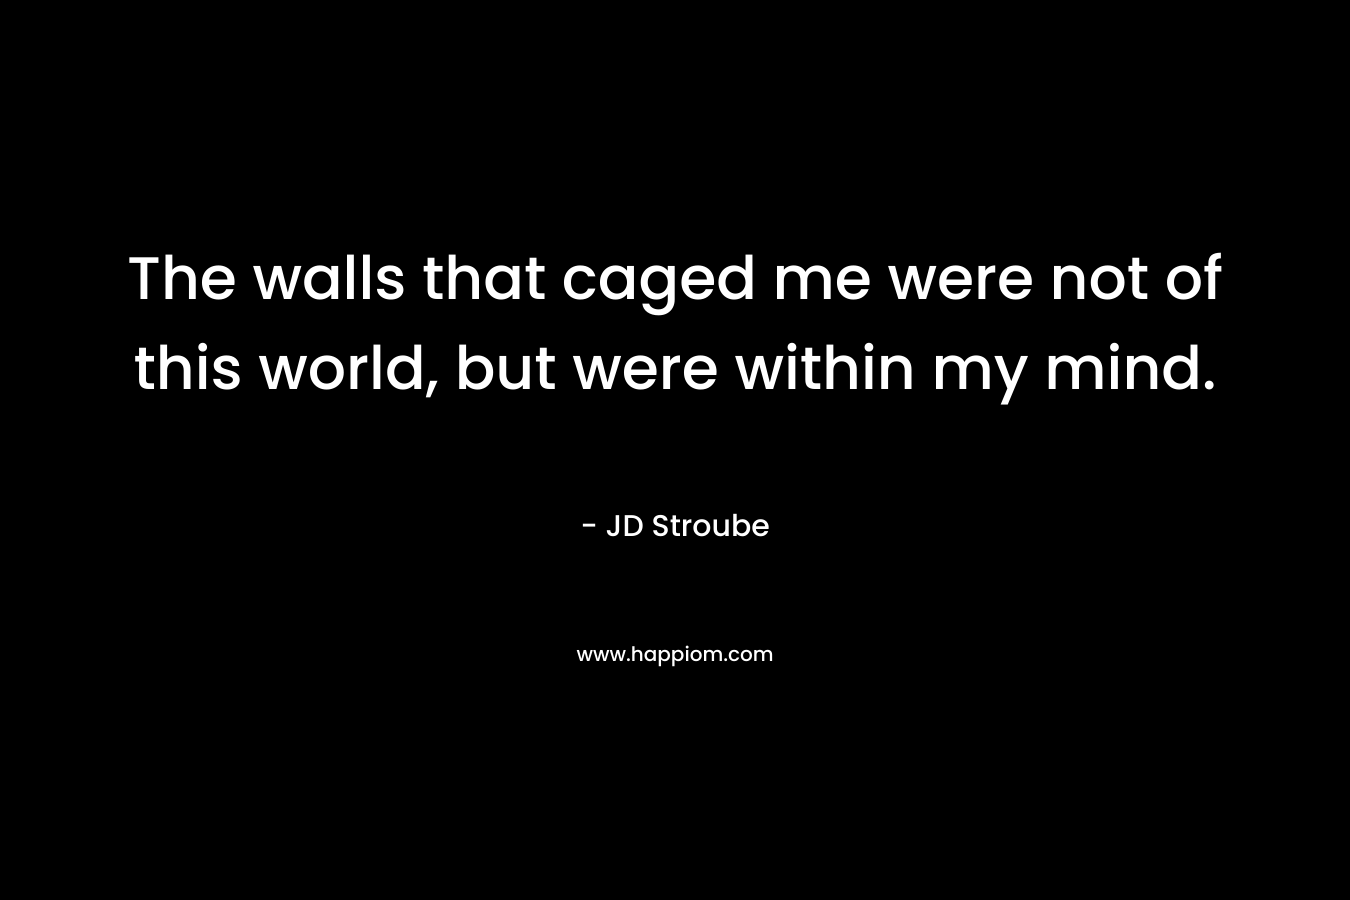 The walls that caged me were not of this world, but were within my mind.